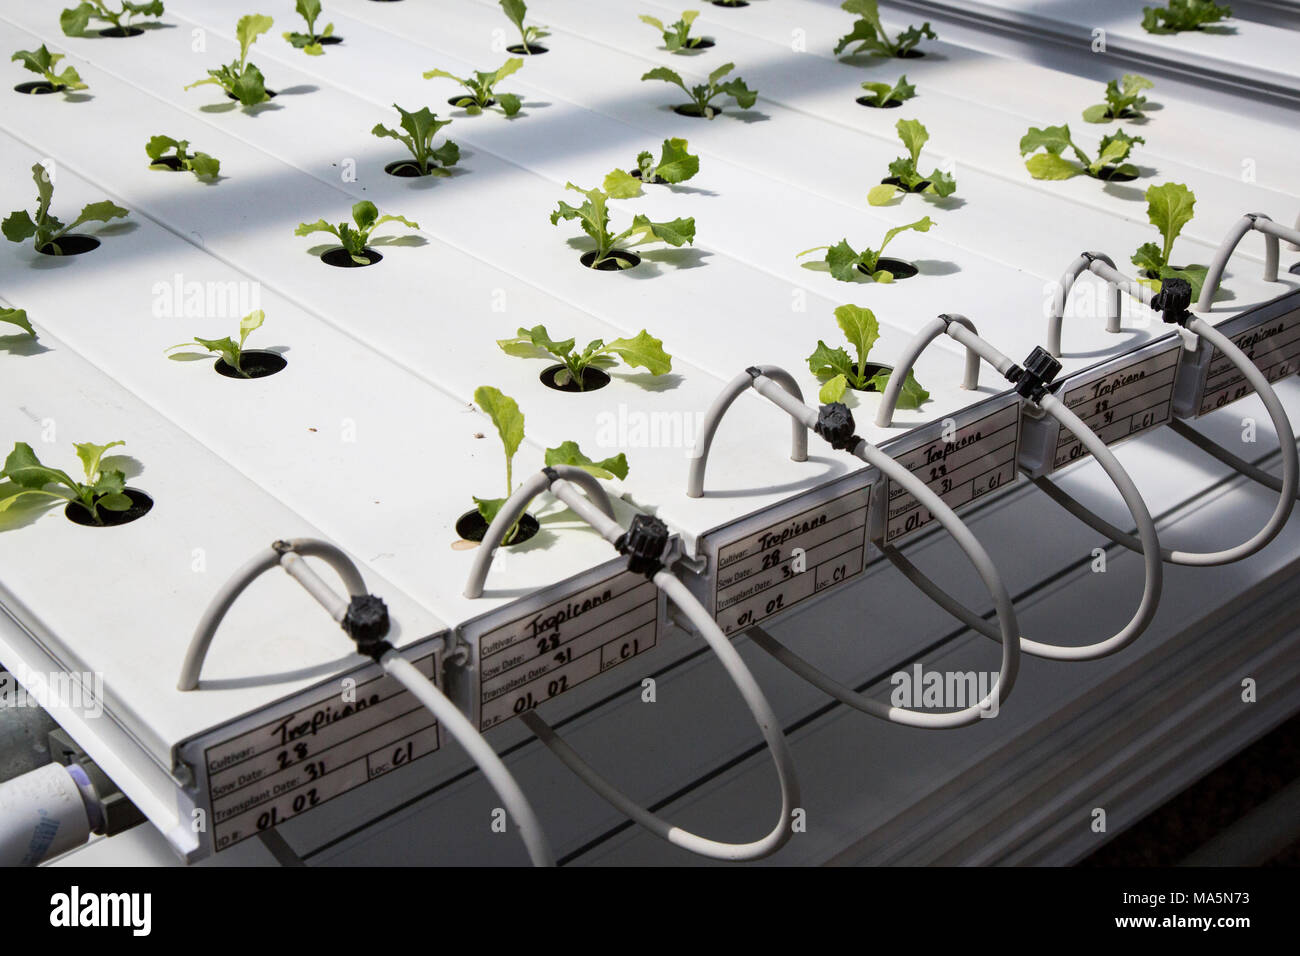 Hydroponic Agriculture.  Greenhouse Growing Lettuce Seedlings.  Dyersville, Iowa, USA. Stock Photo